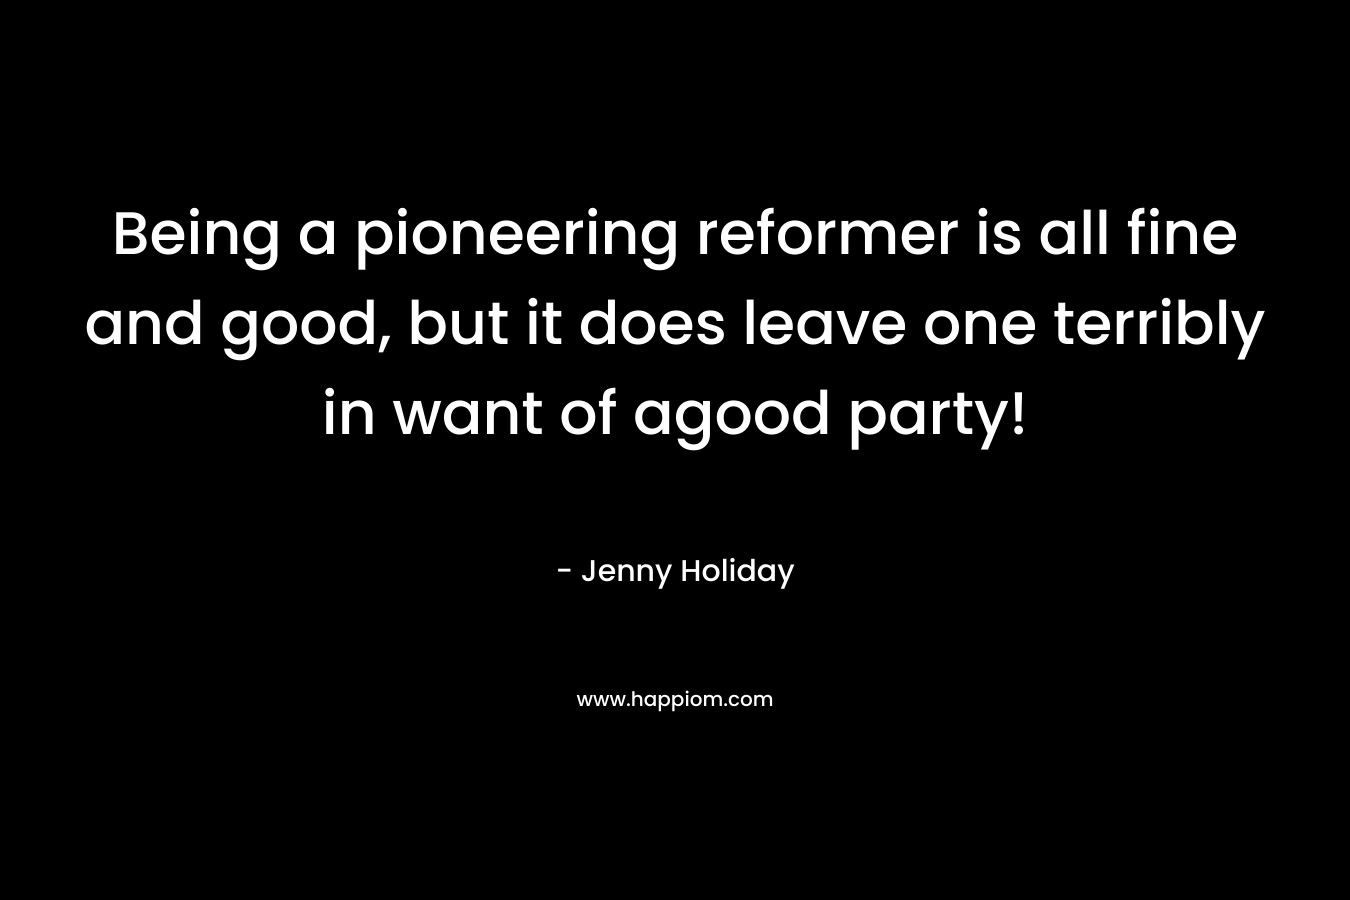 Being a pioneering reformer is all fine and good, but it does leave one terribly in want of agood party!